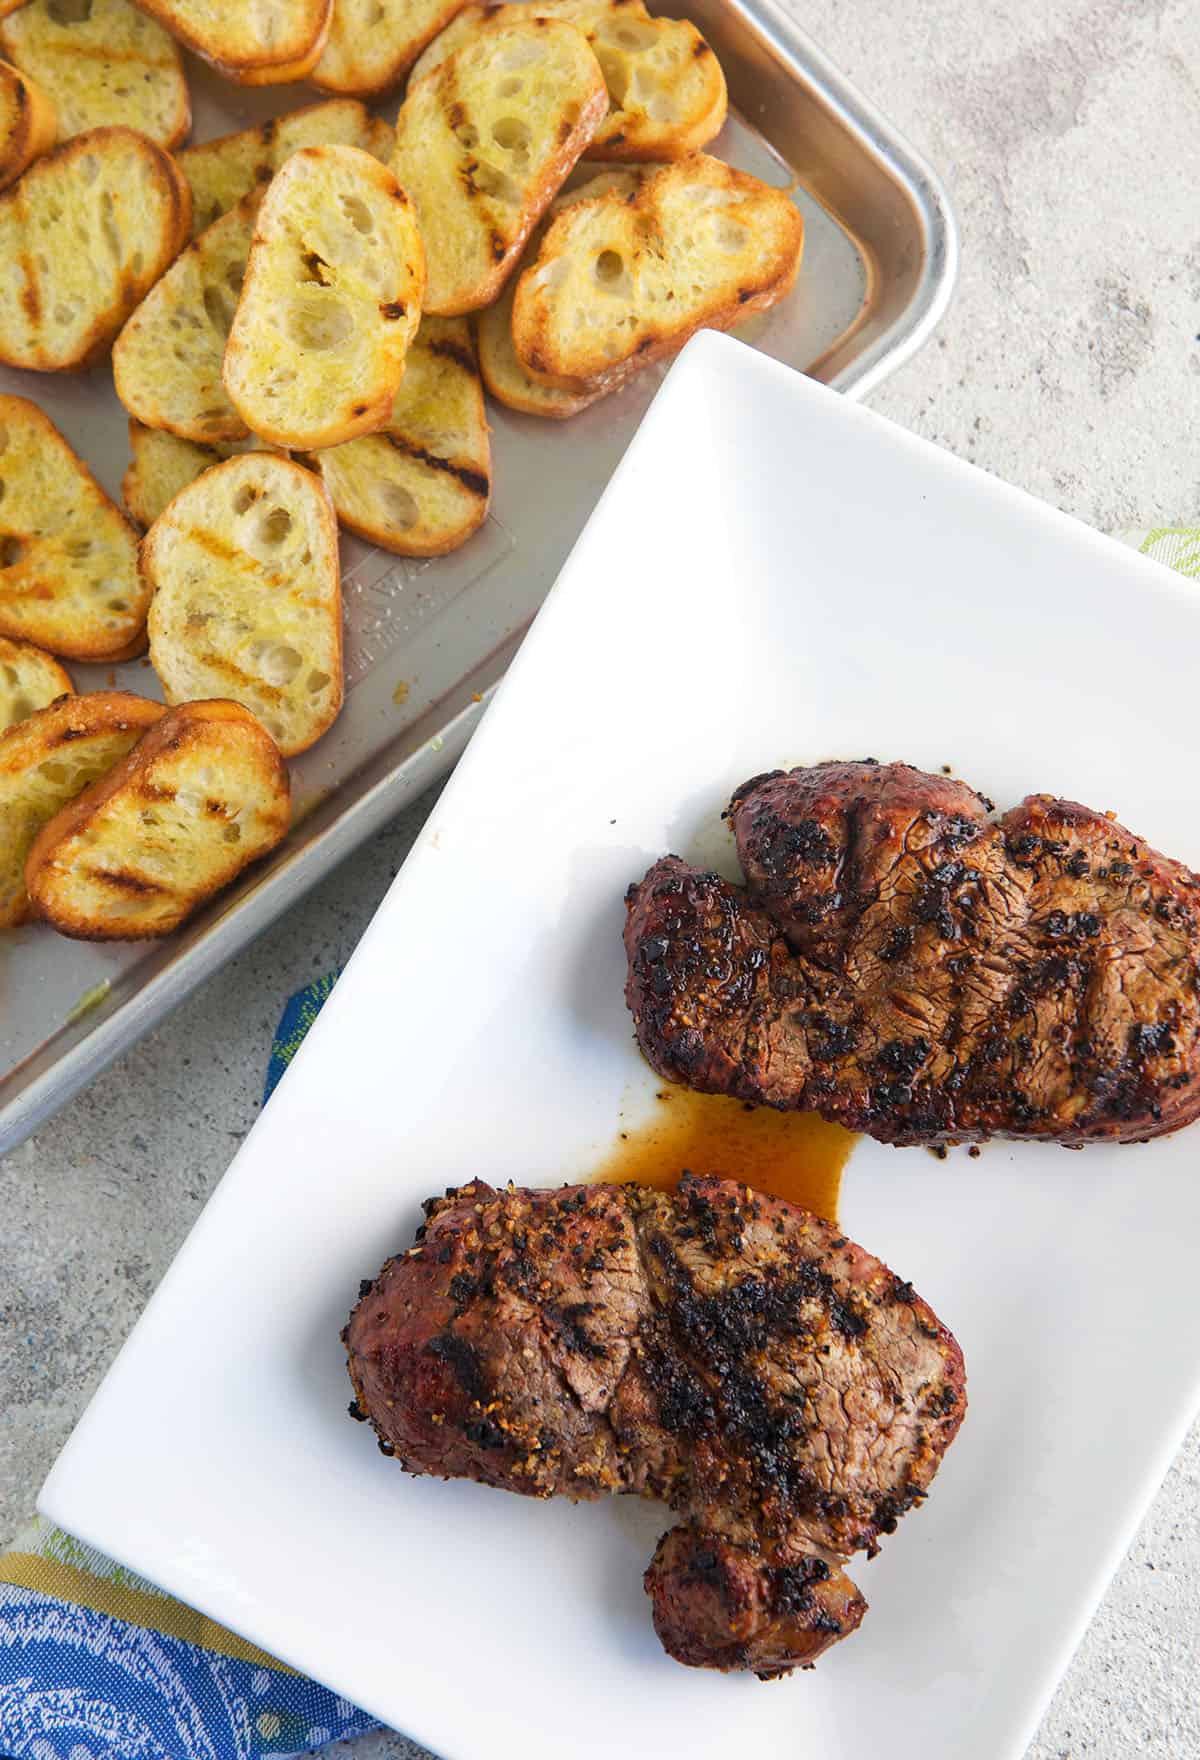 Two cooked steaks are placed next to a sheet pan filled with crostini.